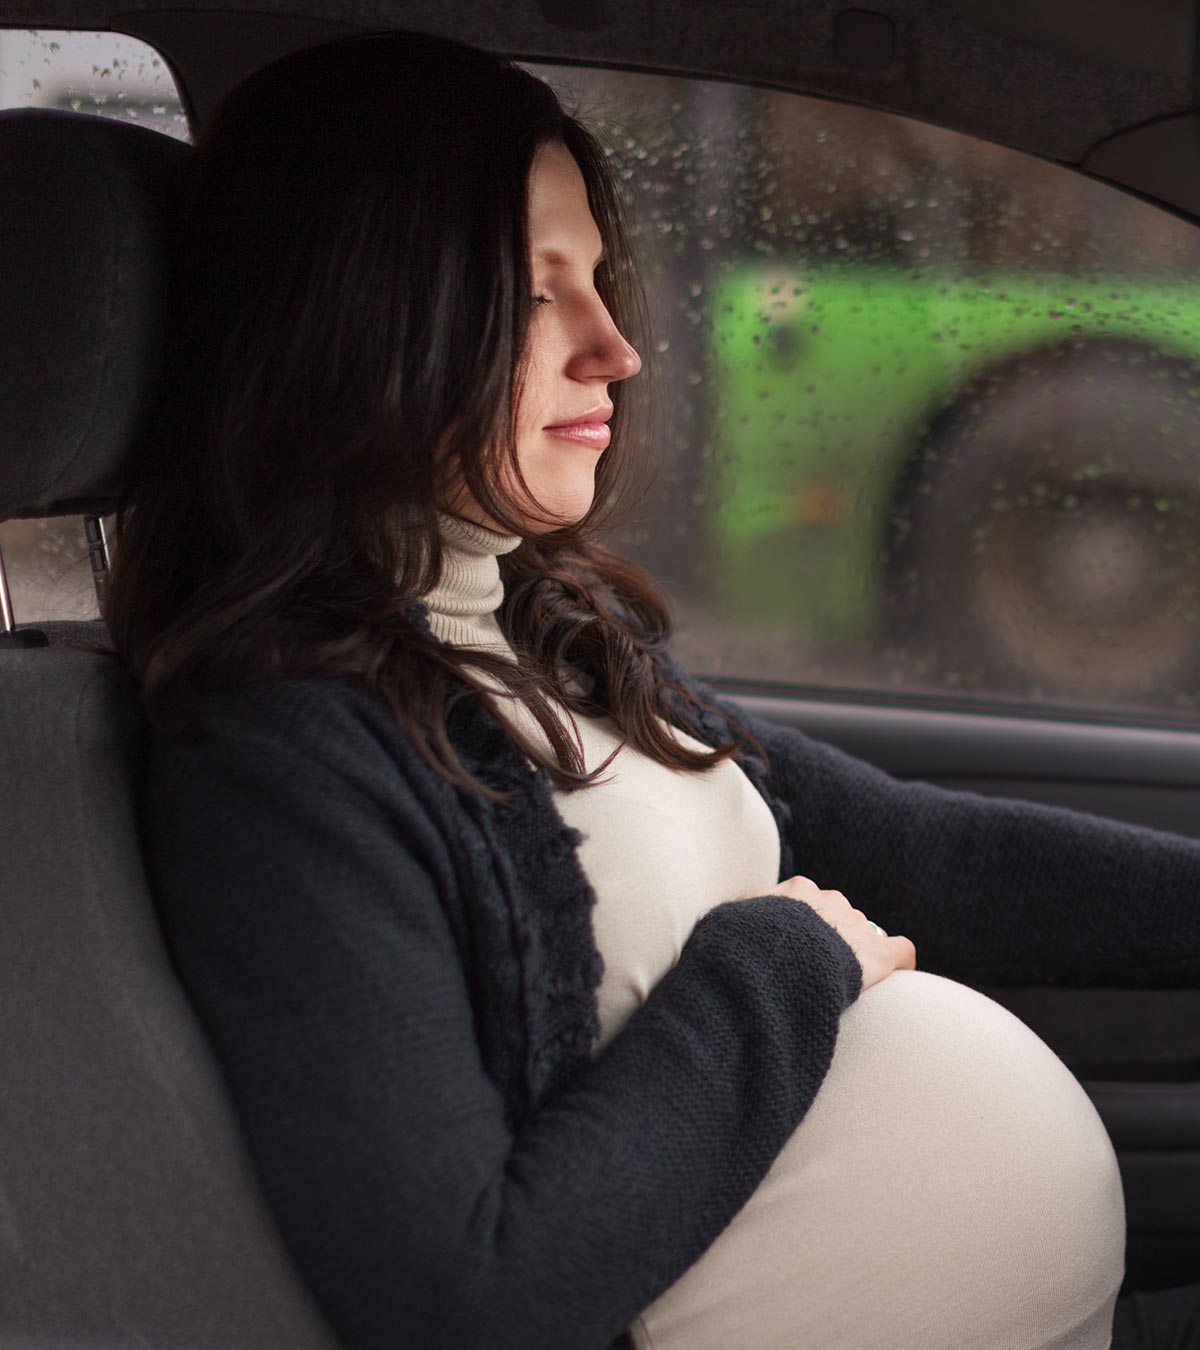 Motion Sickness In Pregnancy: Causes, Symptoms, And Remedies